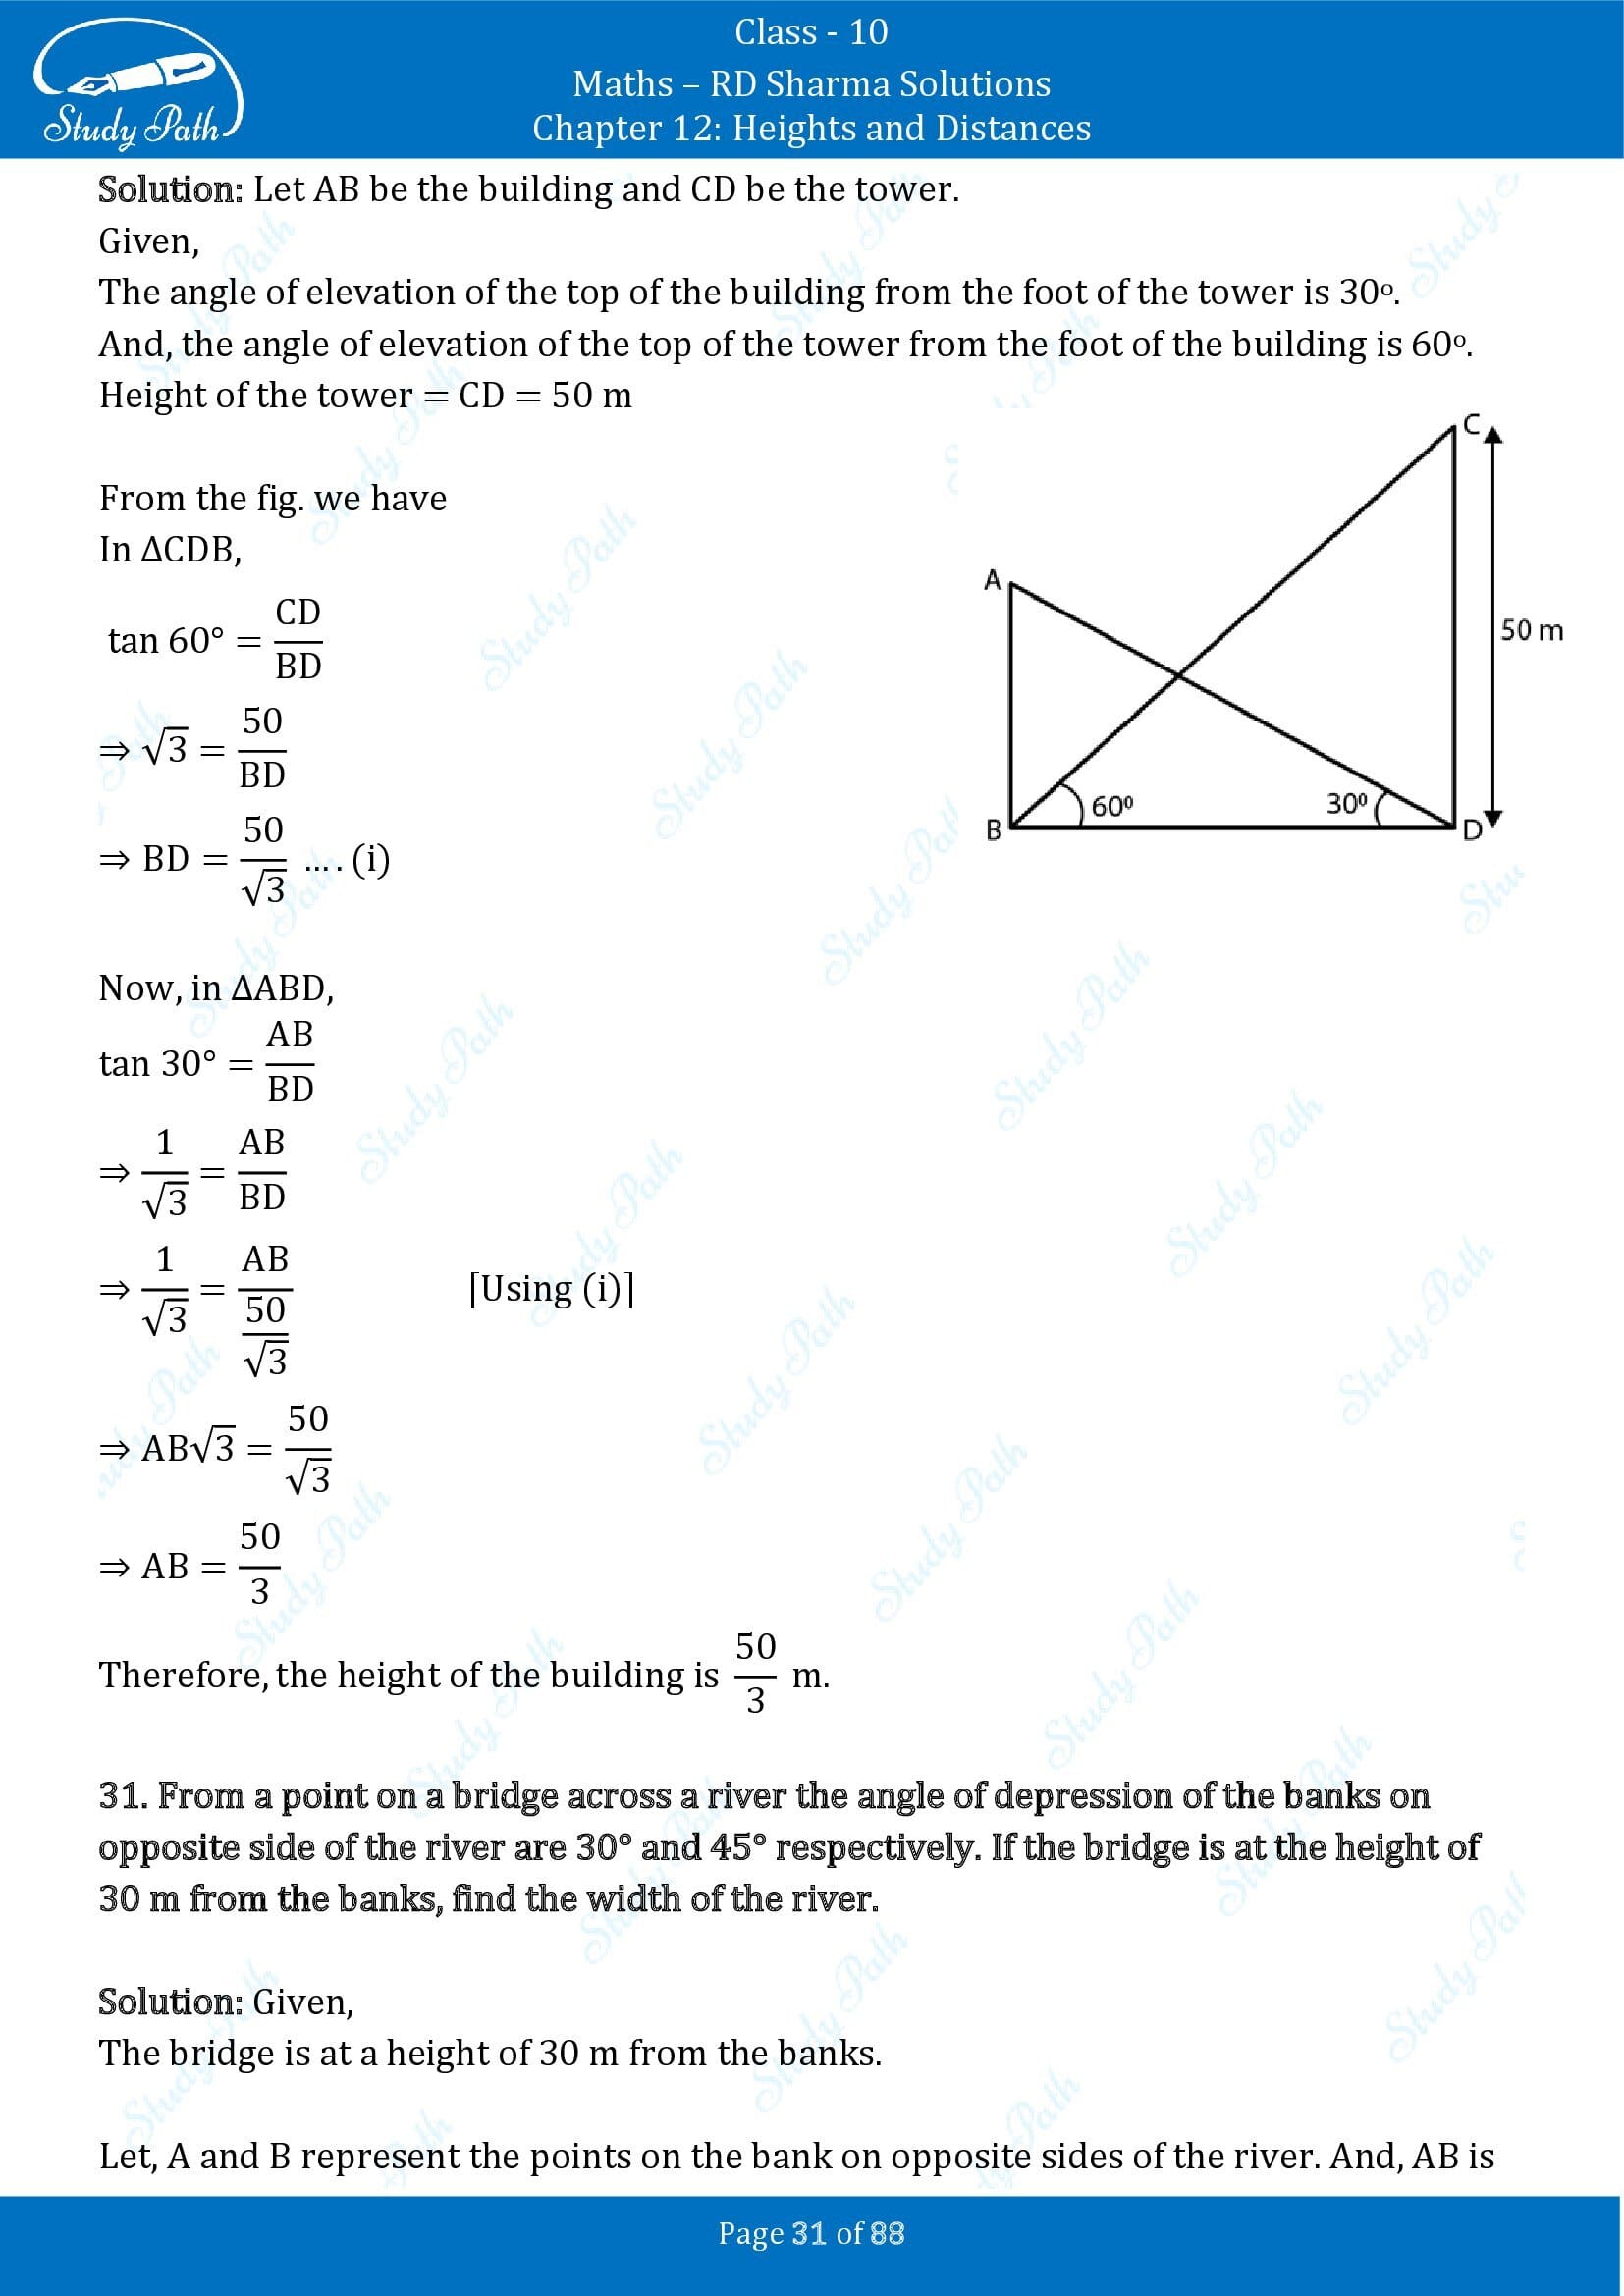 RD Sharma Solutions Class 10 Chapter 12 Heights and Distances Exercise 12.1 00031